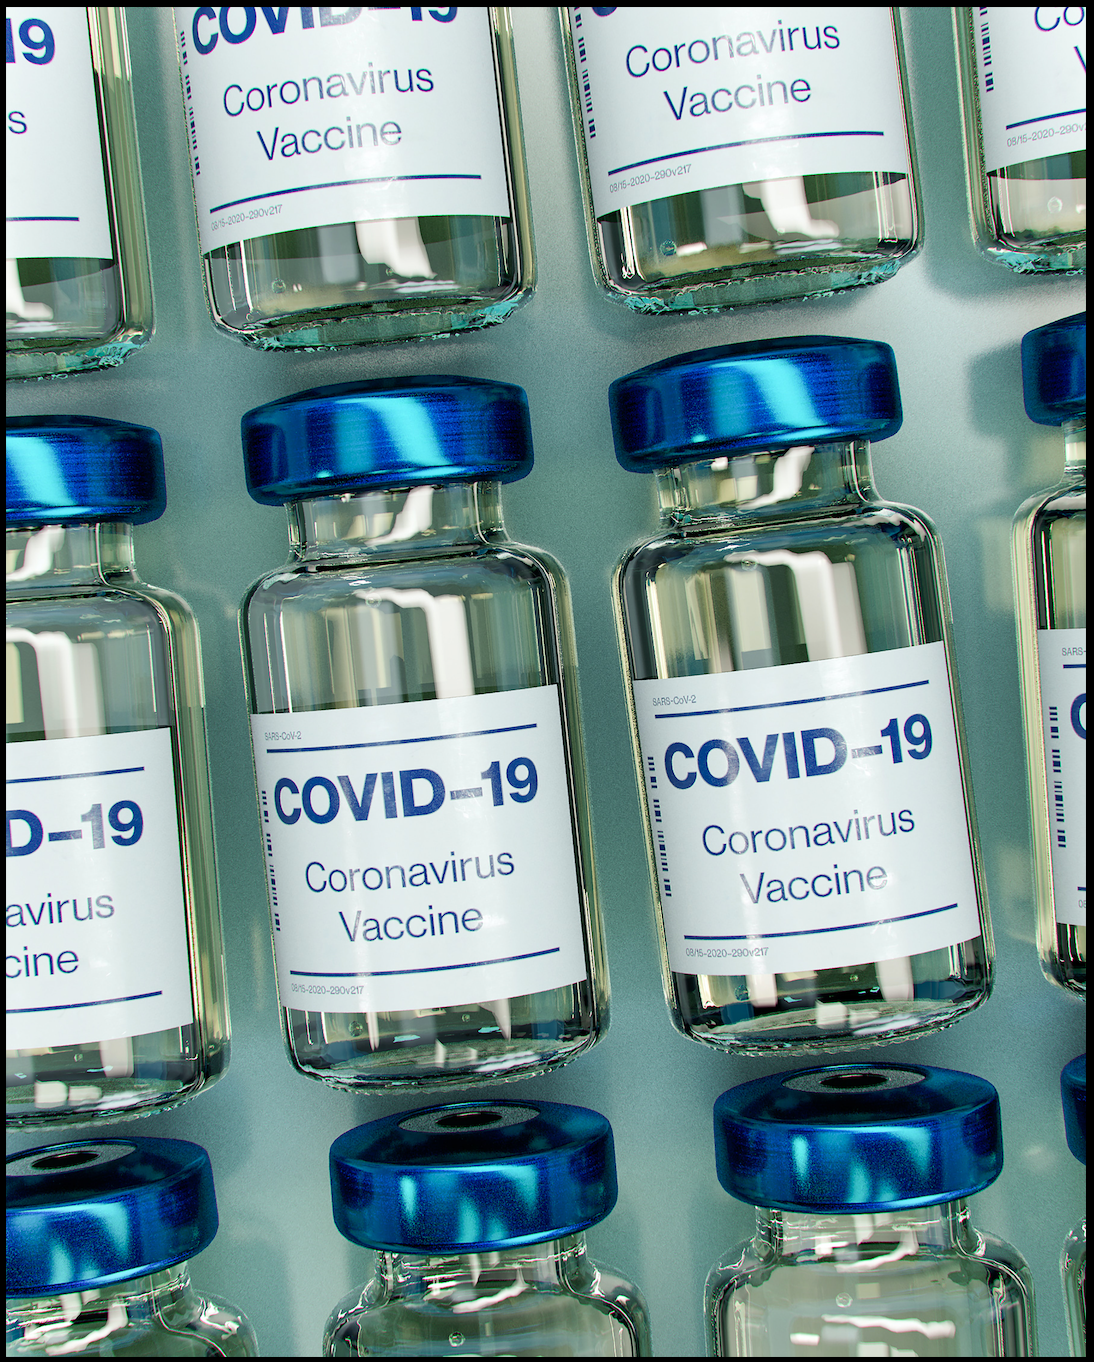 South Africa COVID-19 vaccine producer receives €600 million financial support